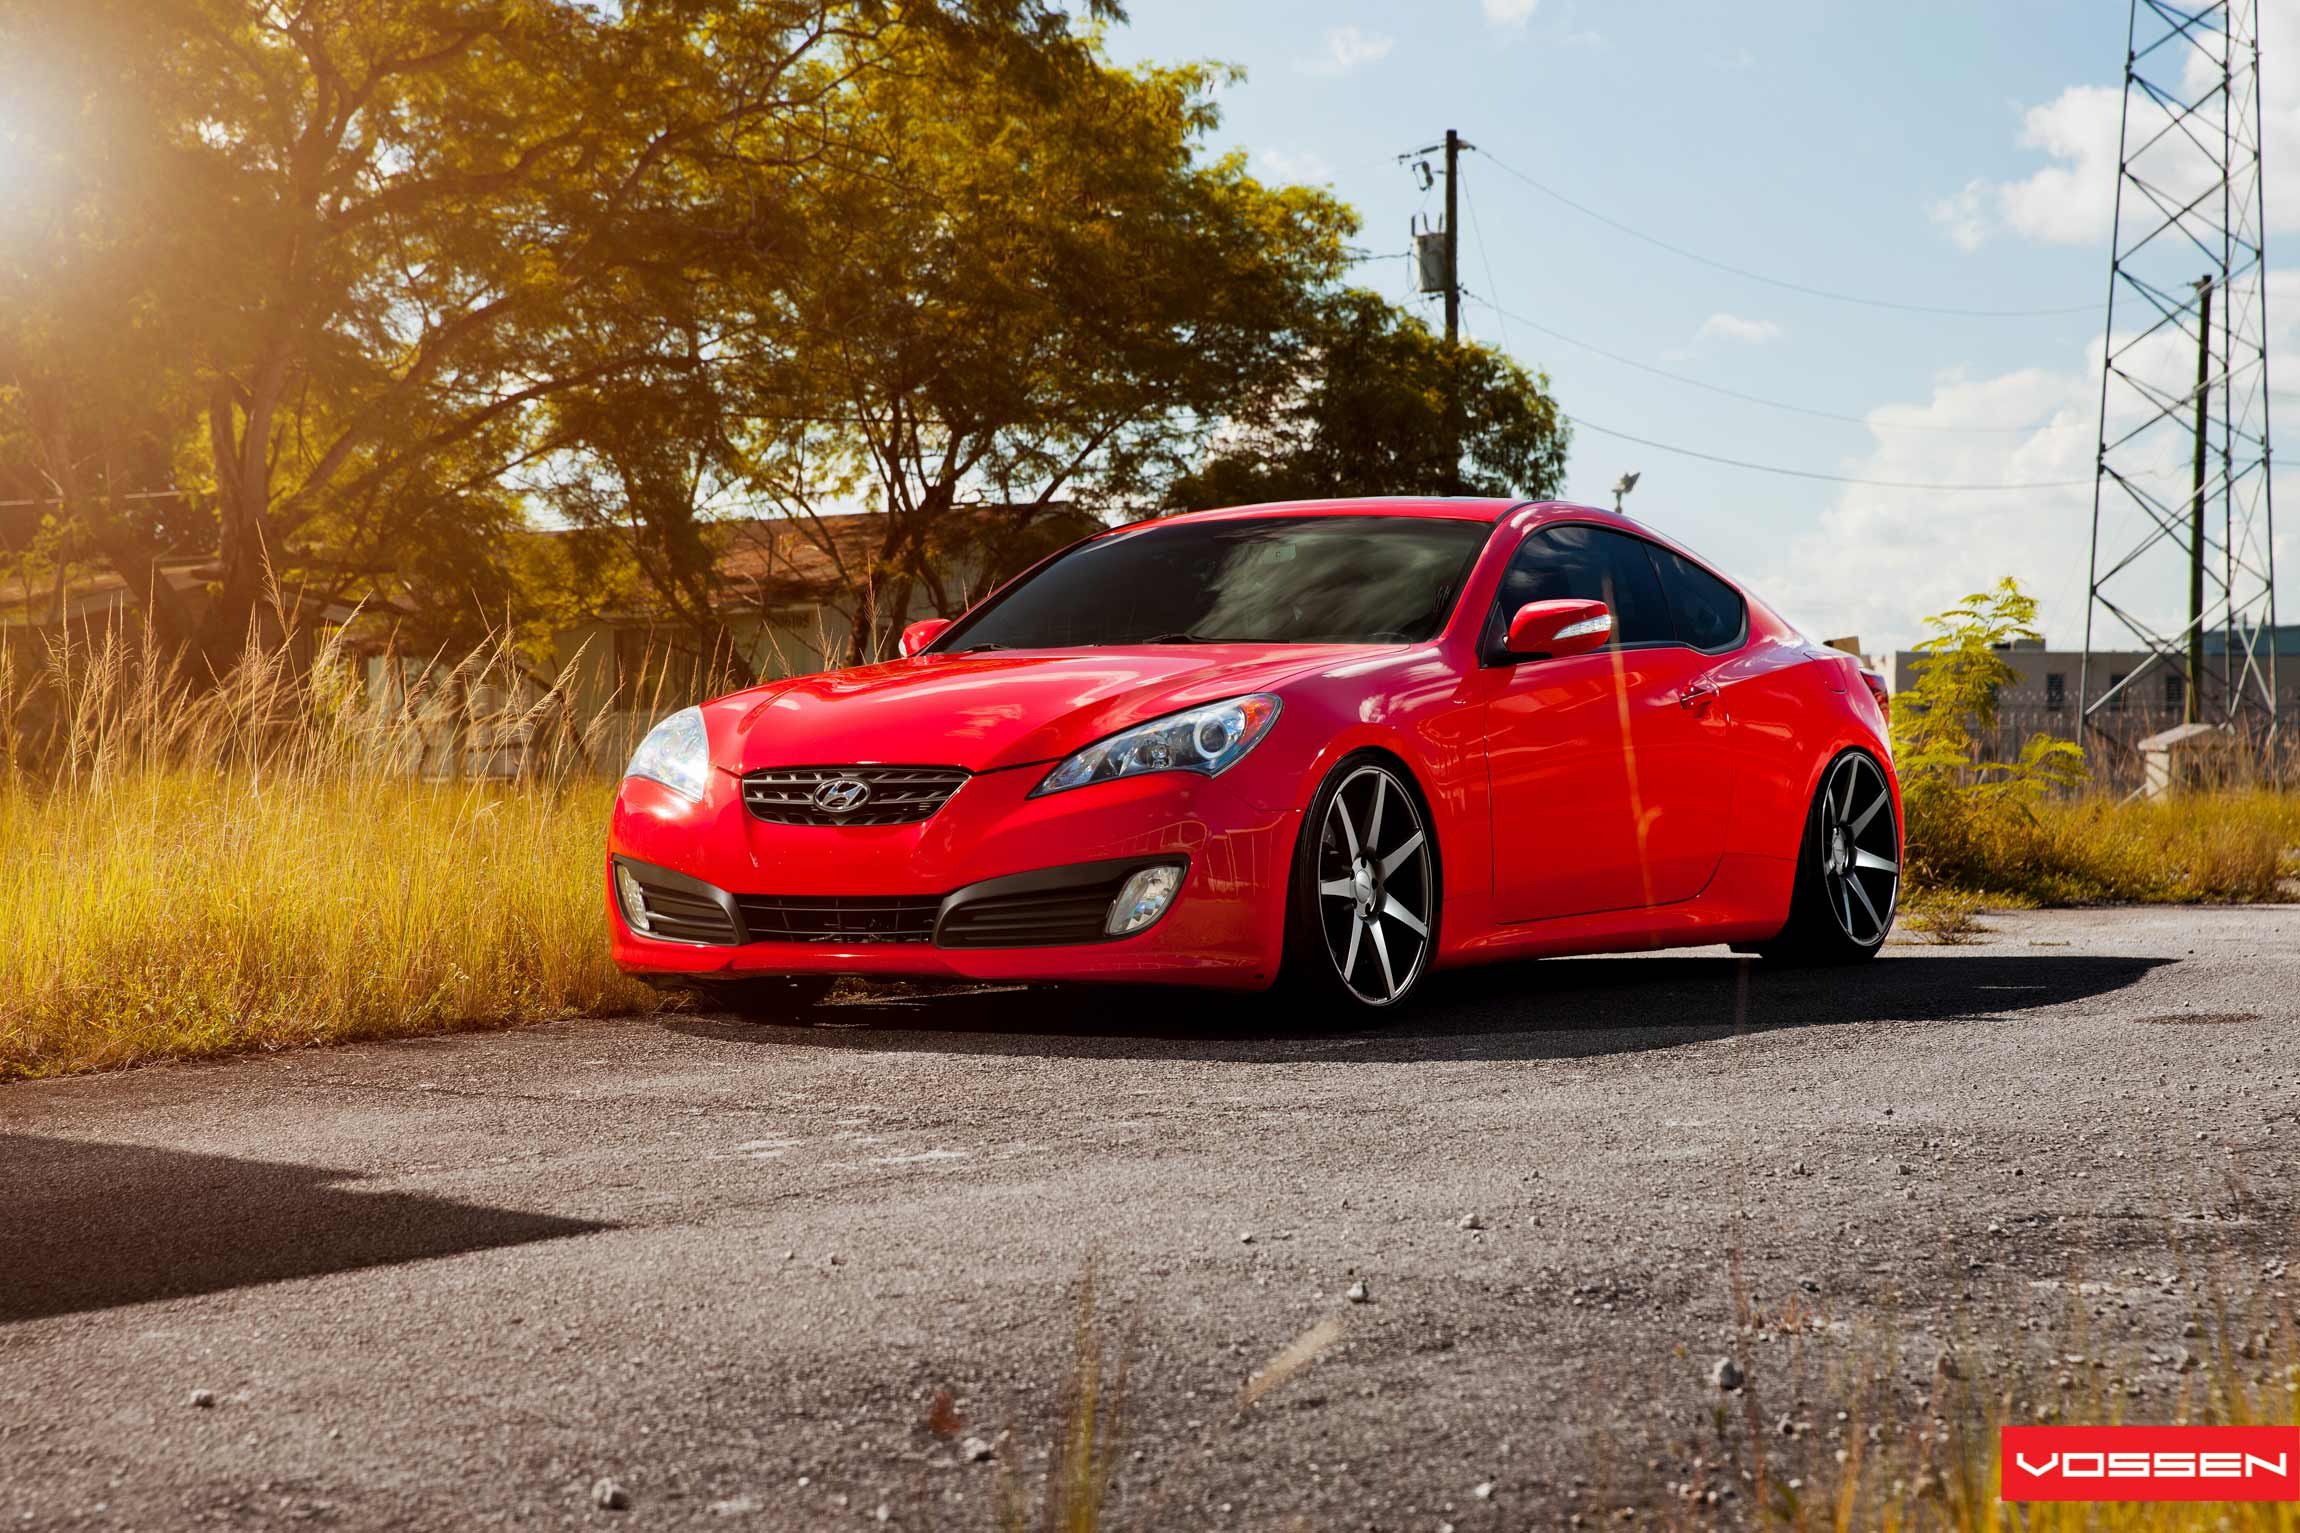 Aftermarket Fog Lights on Red Hyundai Genesis Coupe - Photo by Vossen